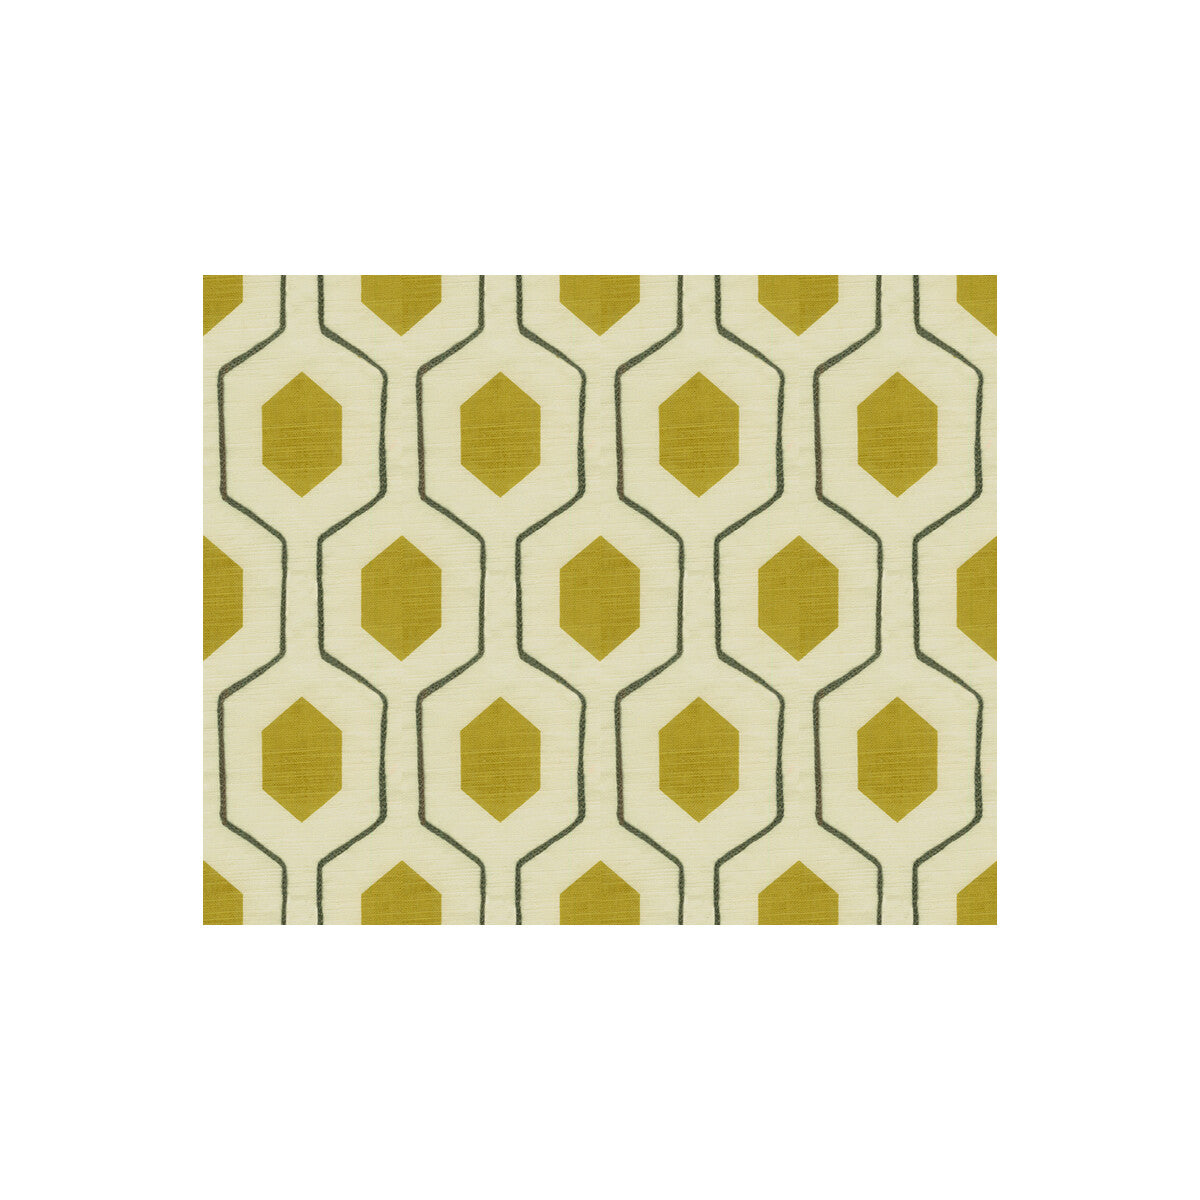 Everson fabric in chartreuse color - pattern EVERSON.311.0 - by Kravet Basics in the Thom Filicia collection